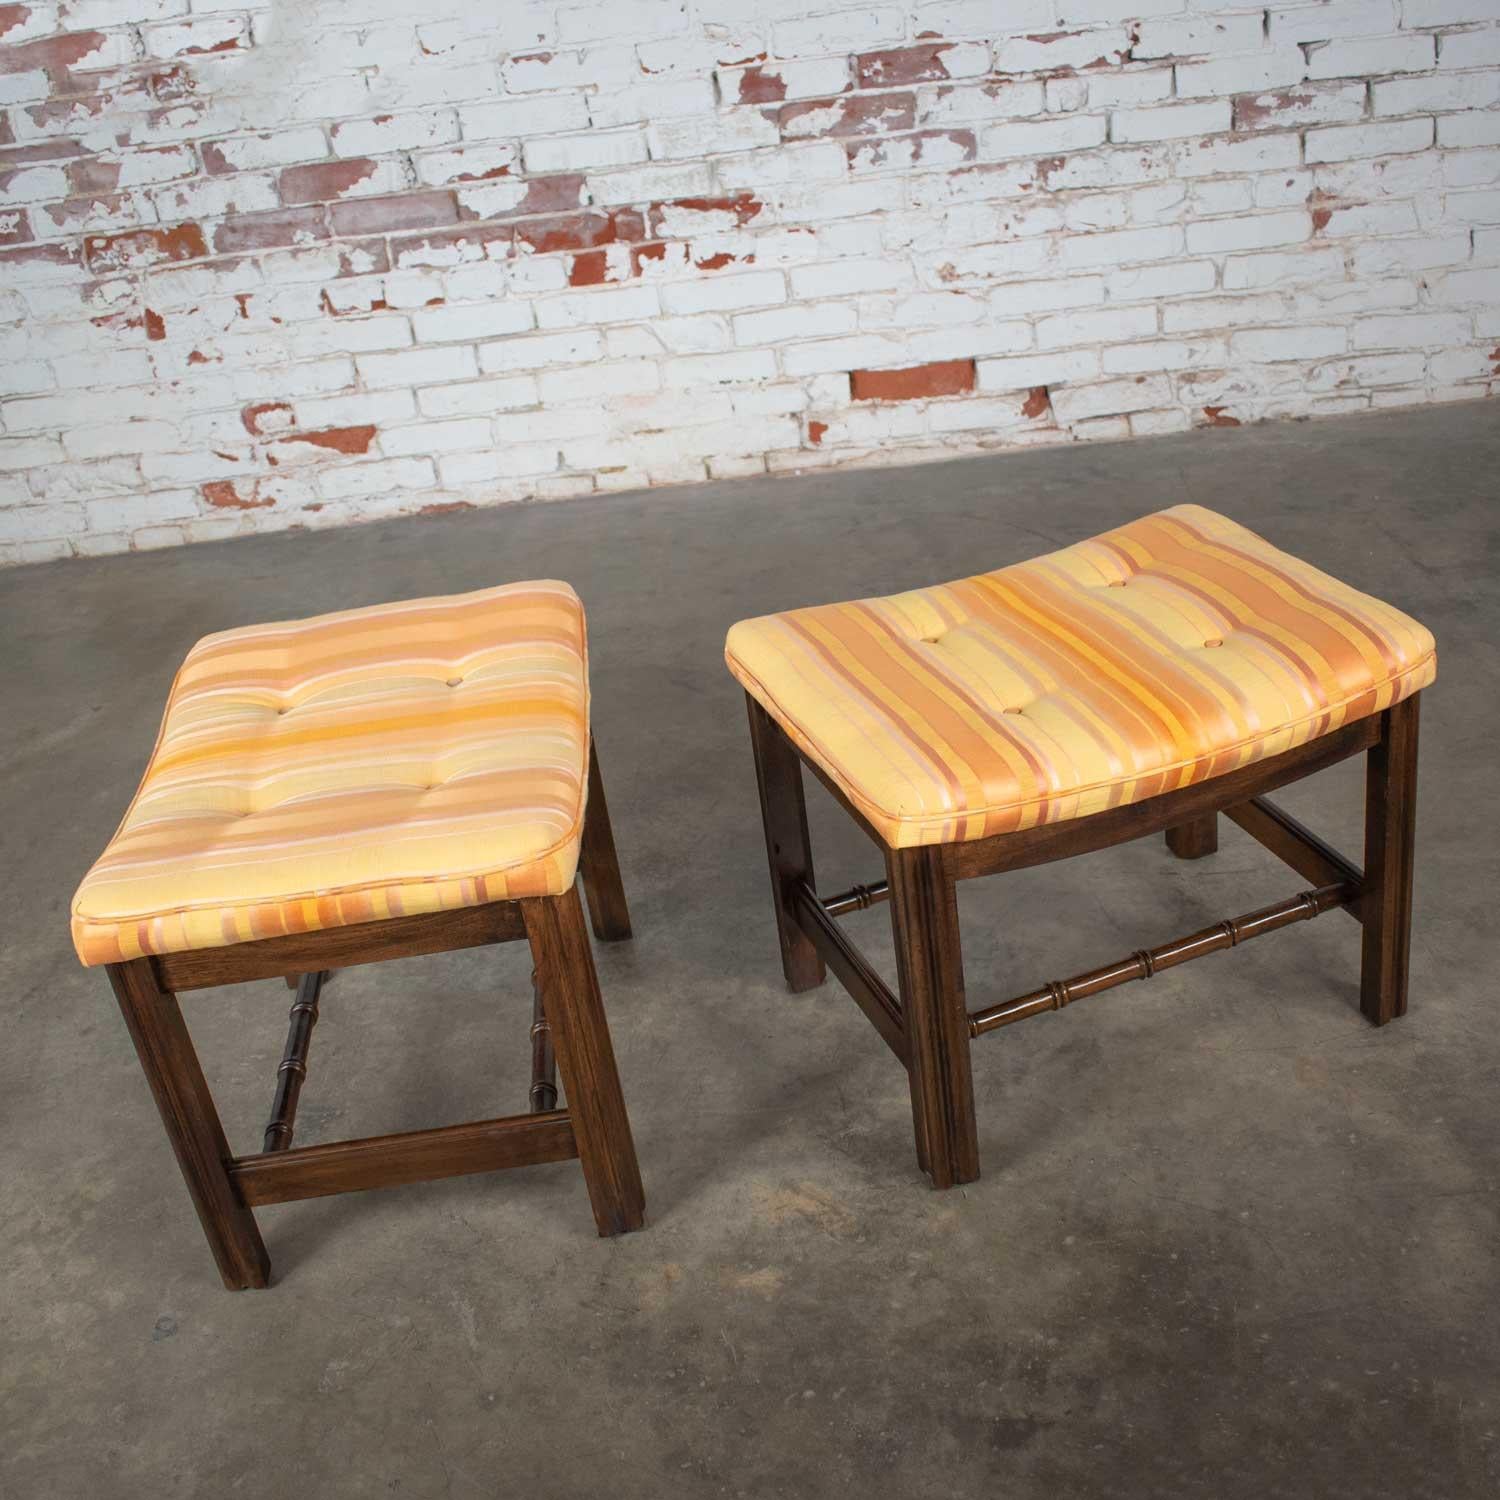 Chinese Chippendale Pair of Foot Stools in Orange and Yellow Stripe Upholstery 3